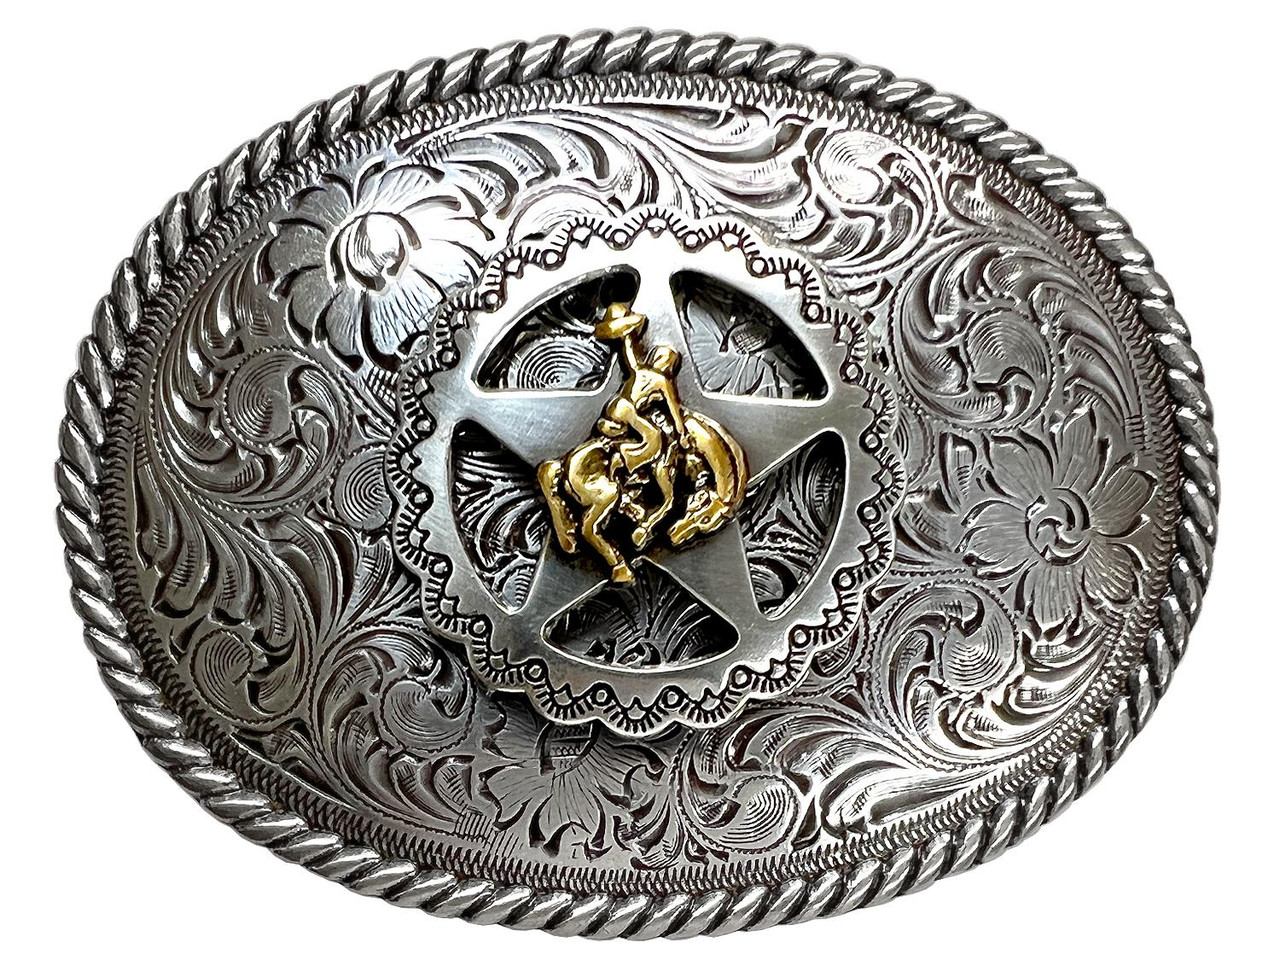 Ferris Silver Works The Classy Cowboy Belt Buckle Silver / Engraved / Copper